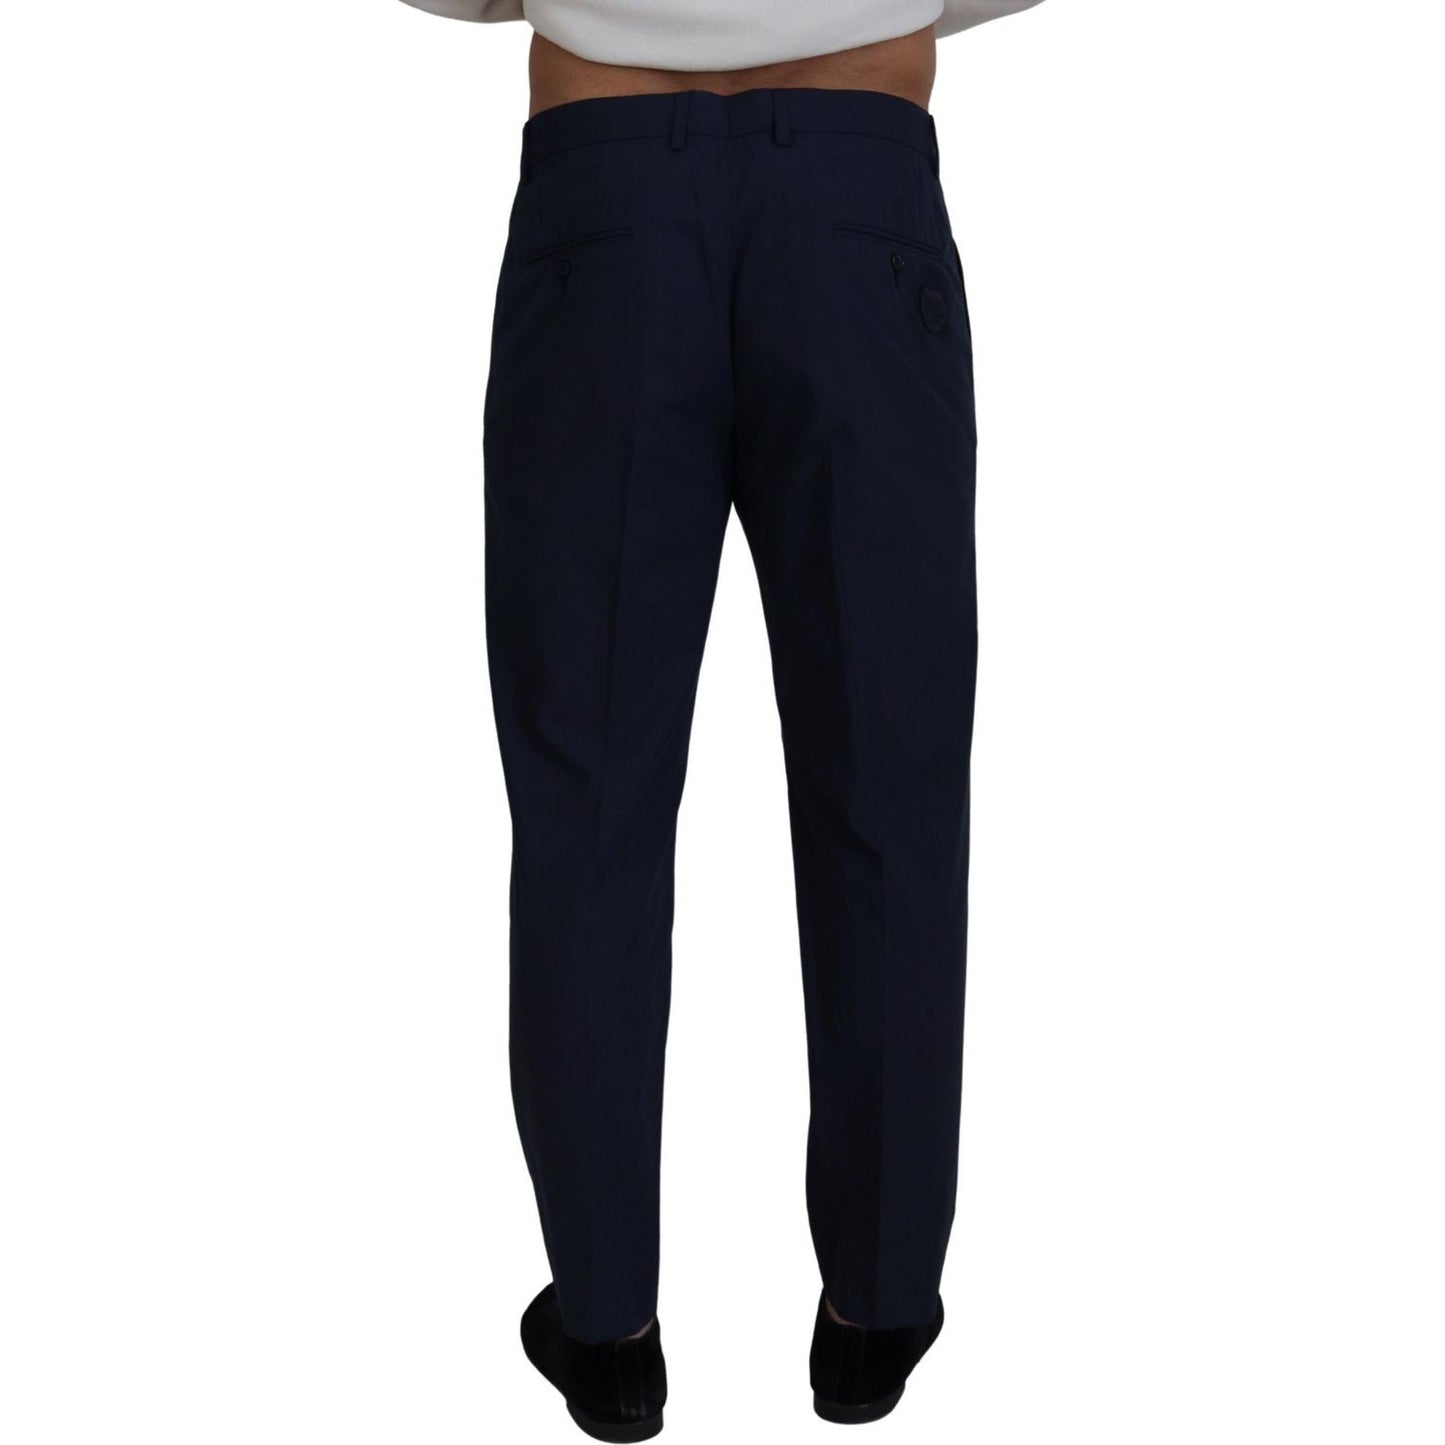 Dolce & Gabbana Chic Slim Fit Chinos in Blue blue-cotton-slim-trousers-chinos-pants